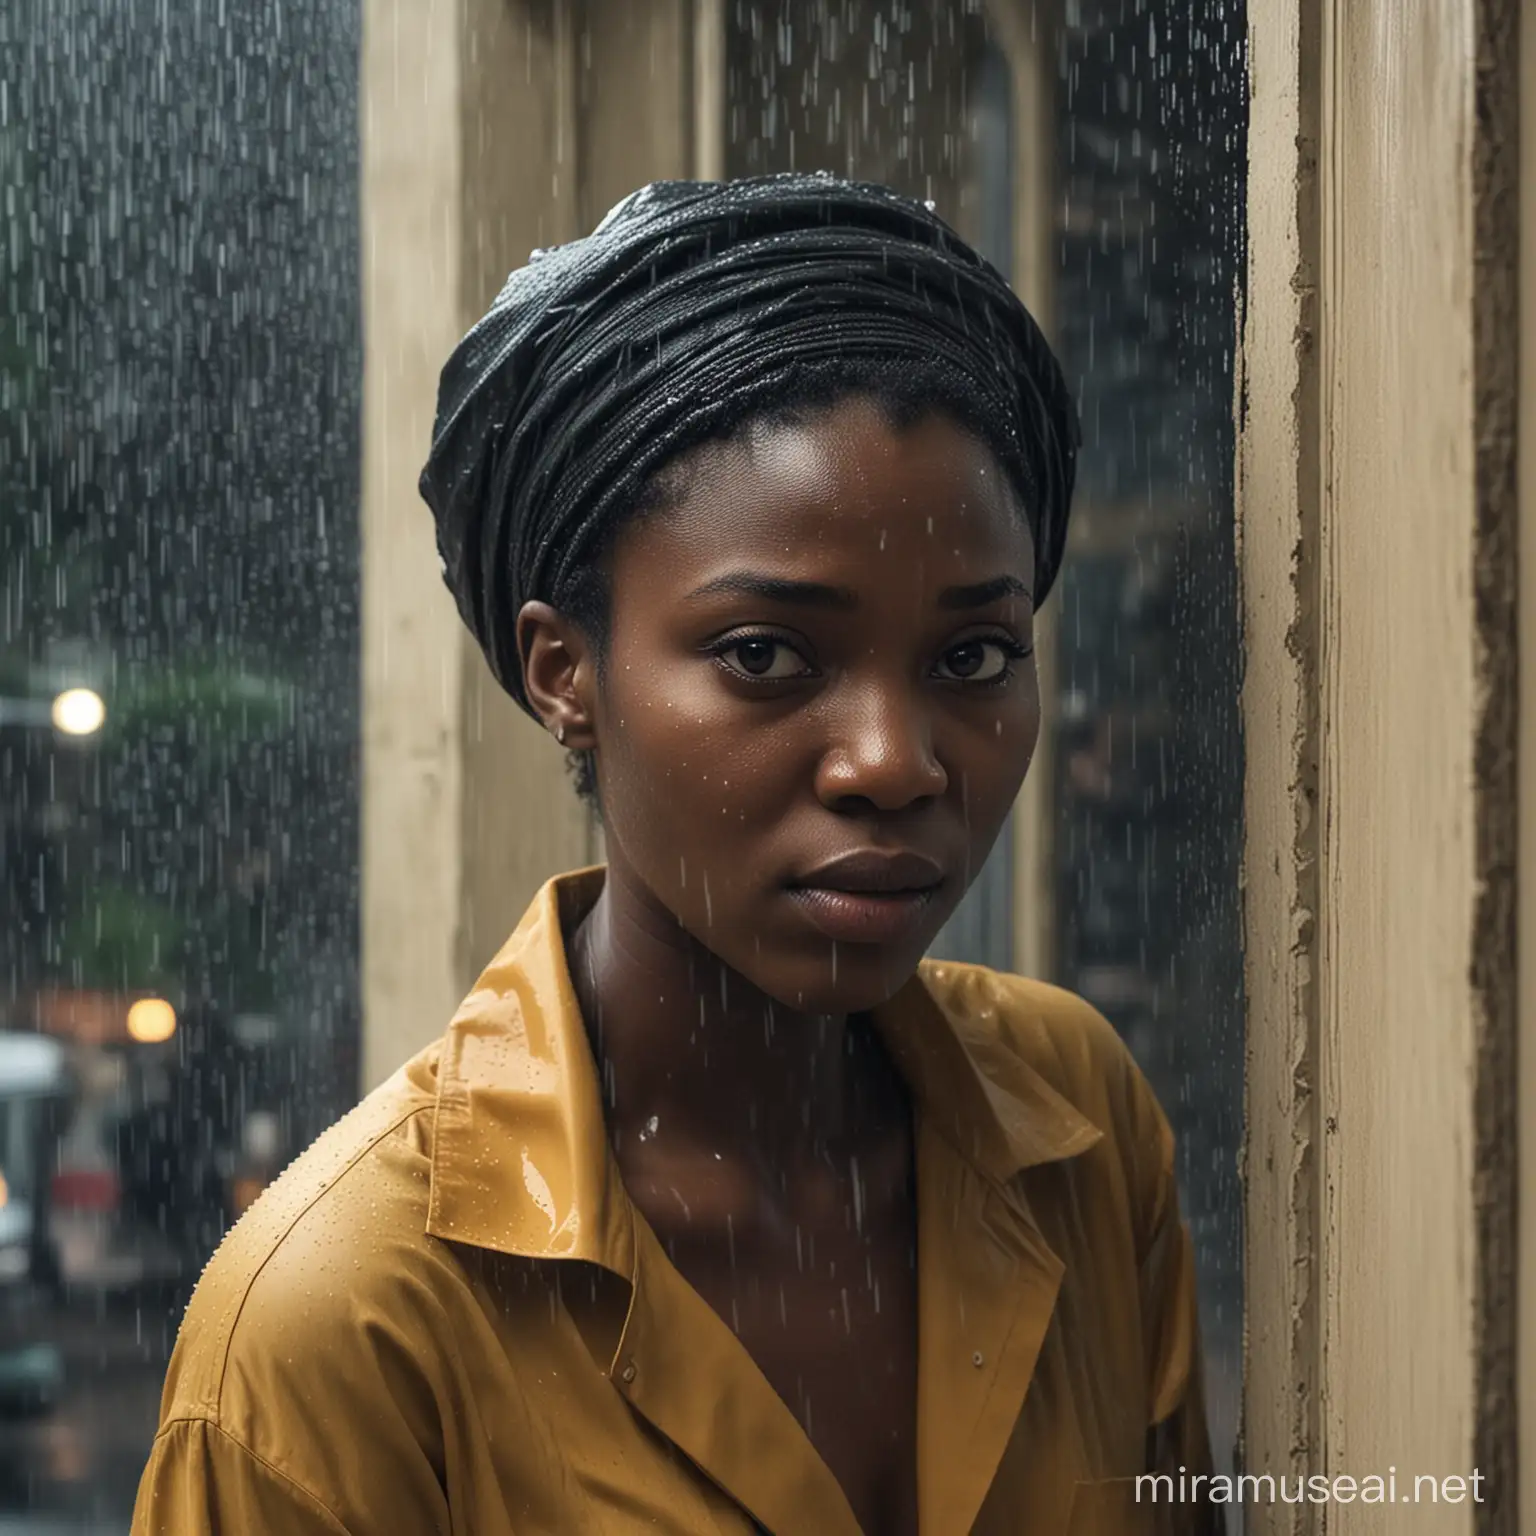 Nigerian Protagonists Desperate Window Closure Amidst Eavesdropping on a Chilling Rainstorm